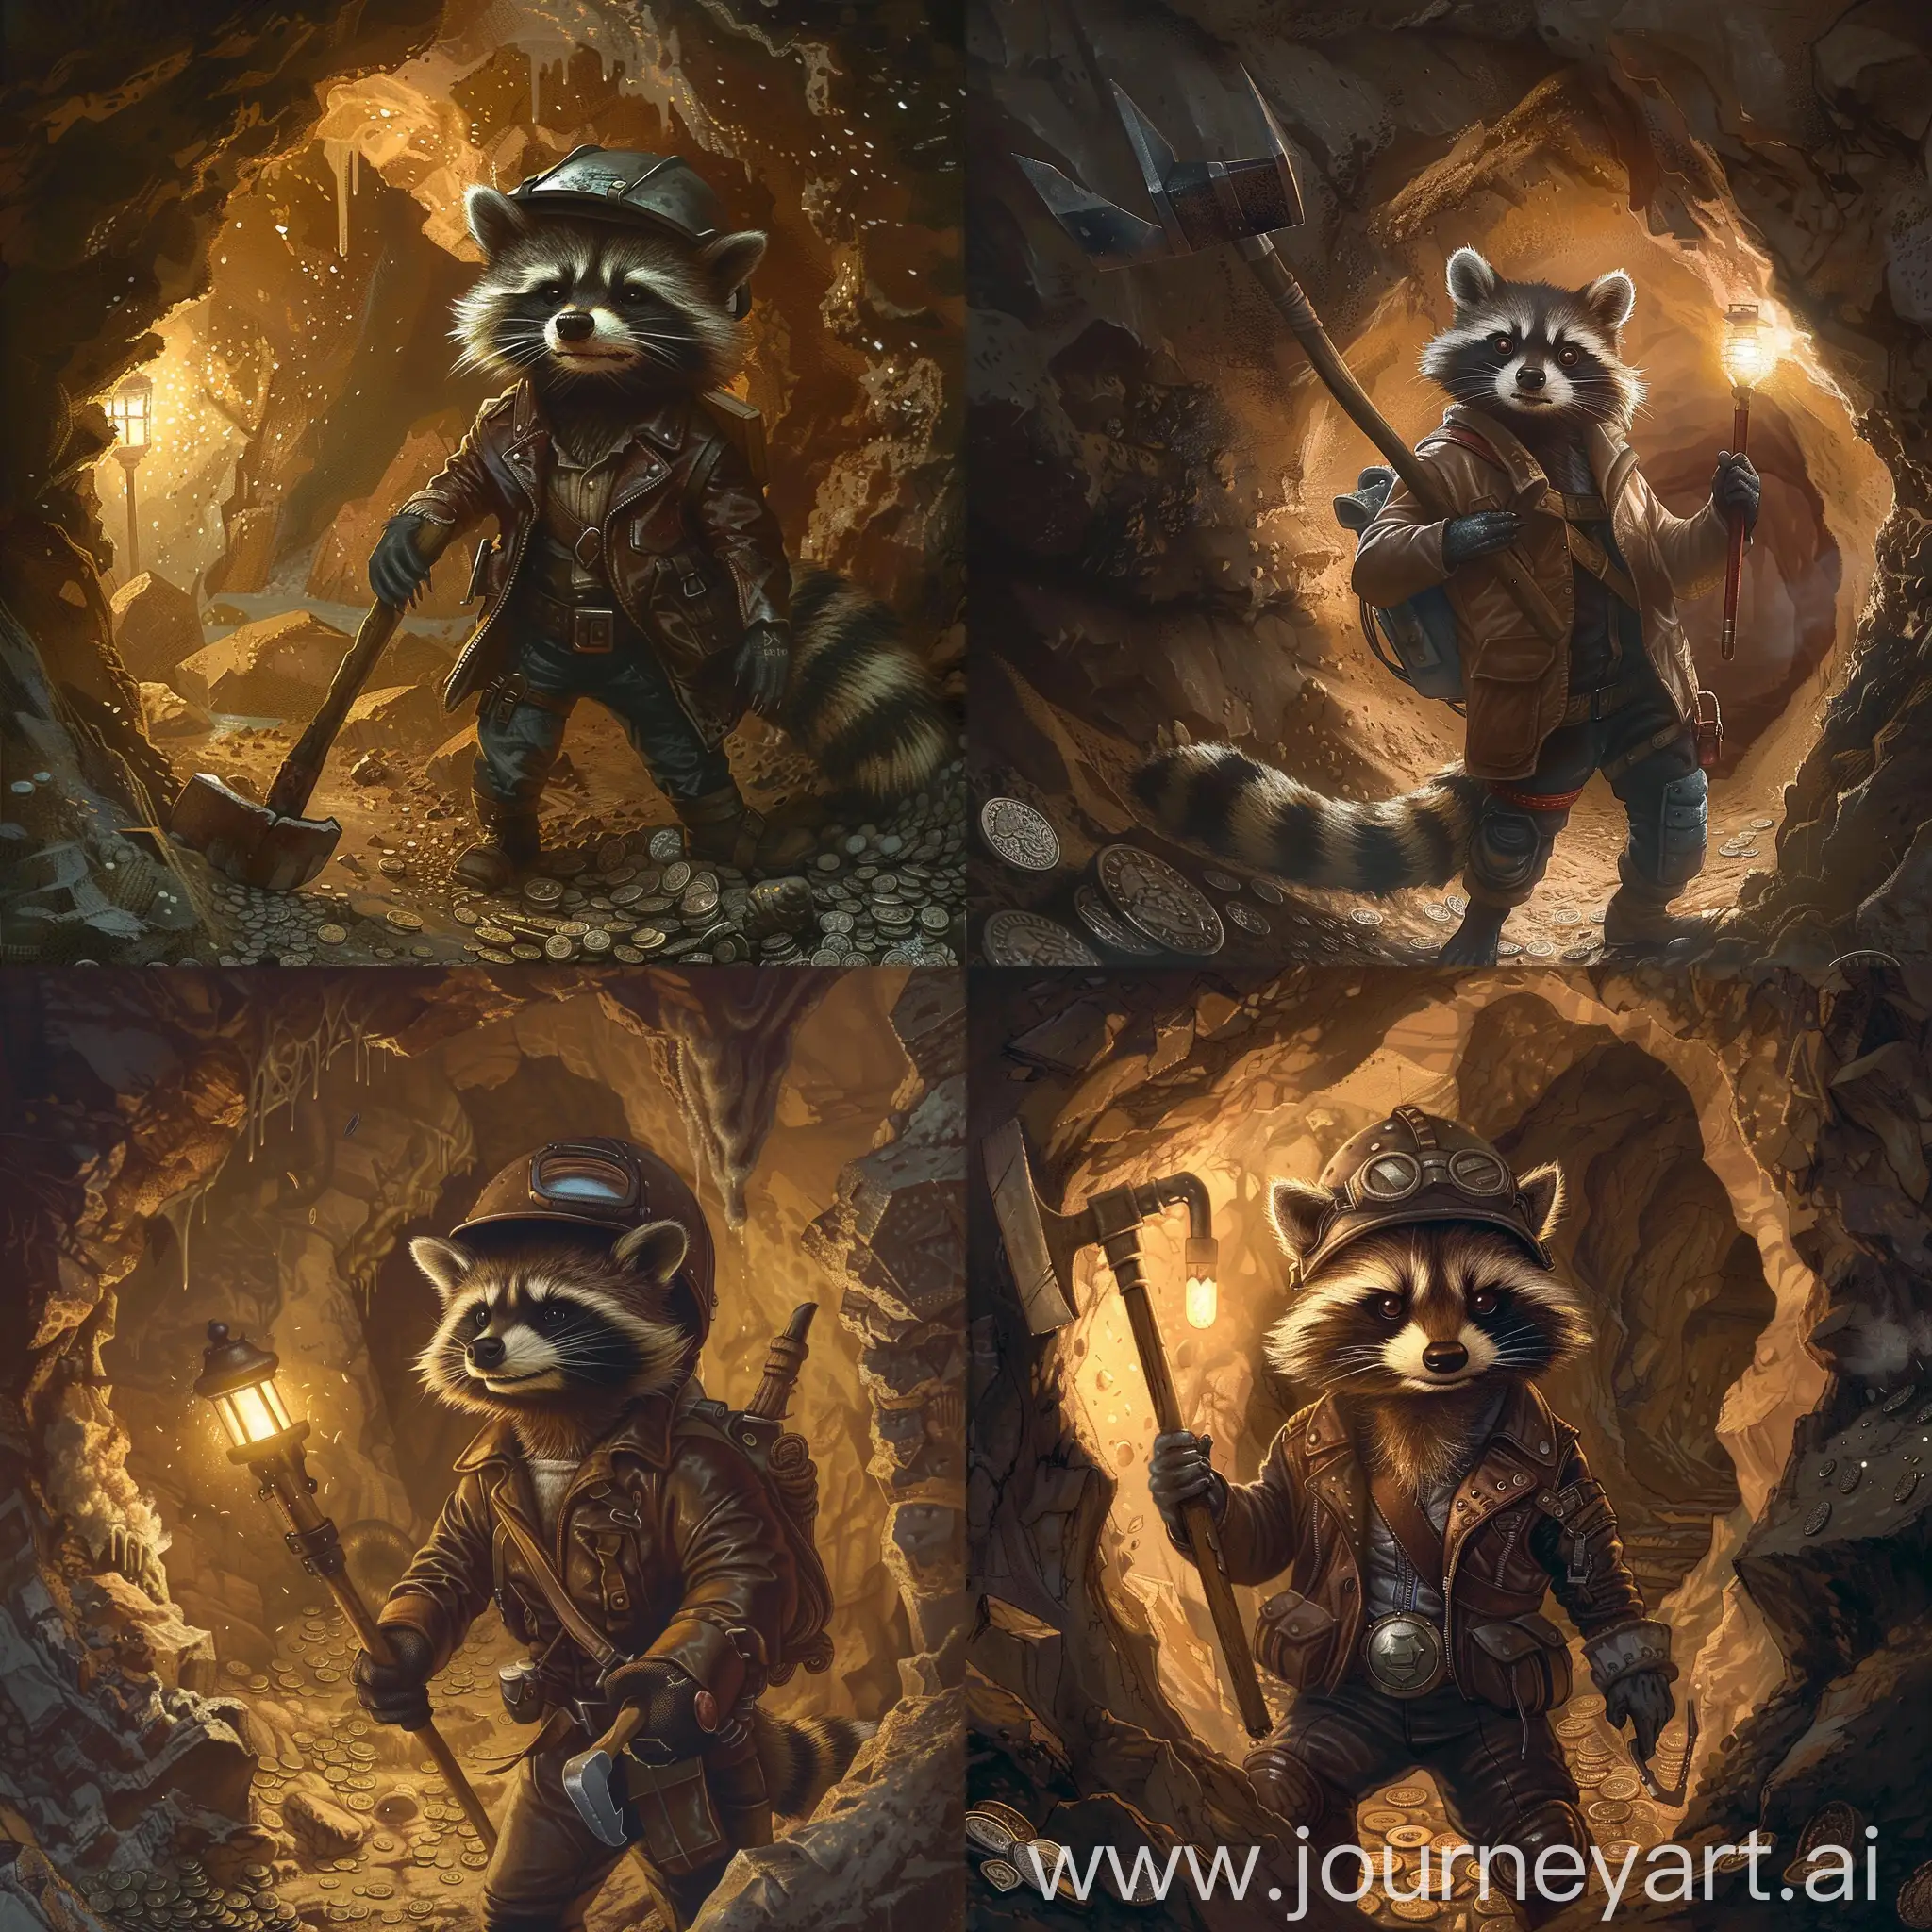 Raccoon miner standing in a cave, in a leather jacket and a helmet, in the hands of a pickaxe, in the walls of the cave there are coins speckled, dim light from a lamp